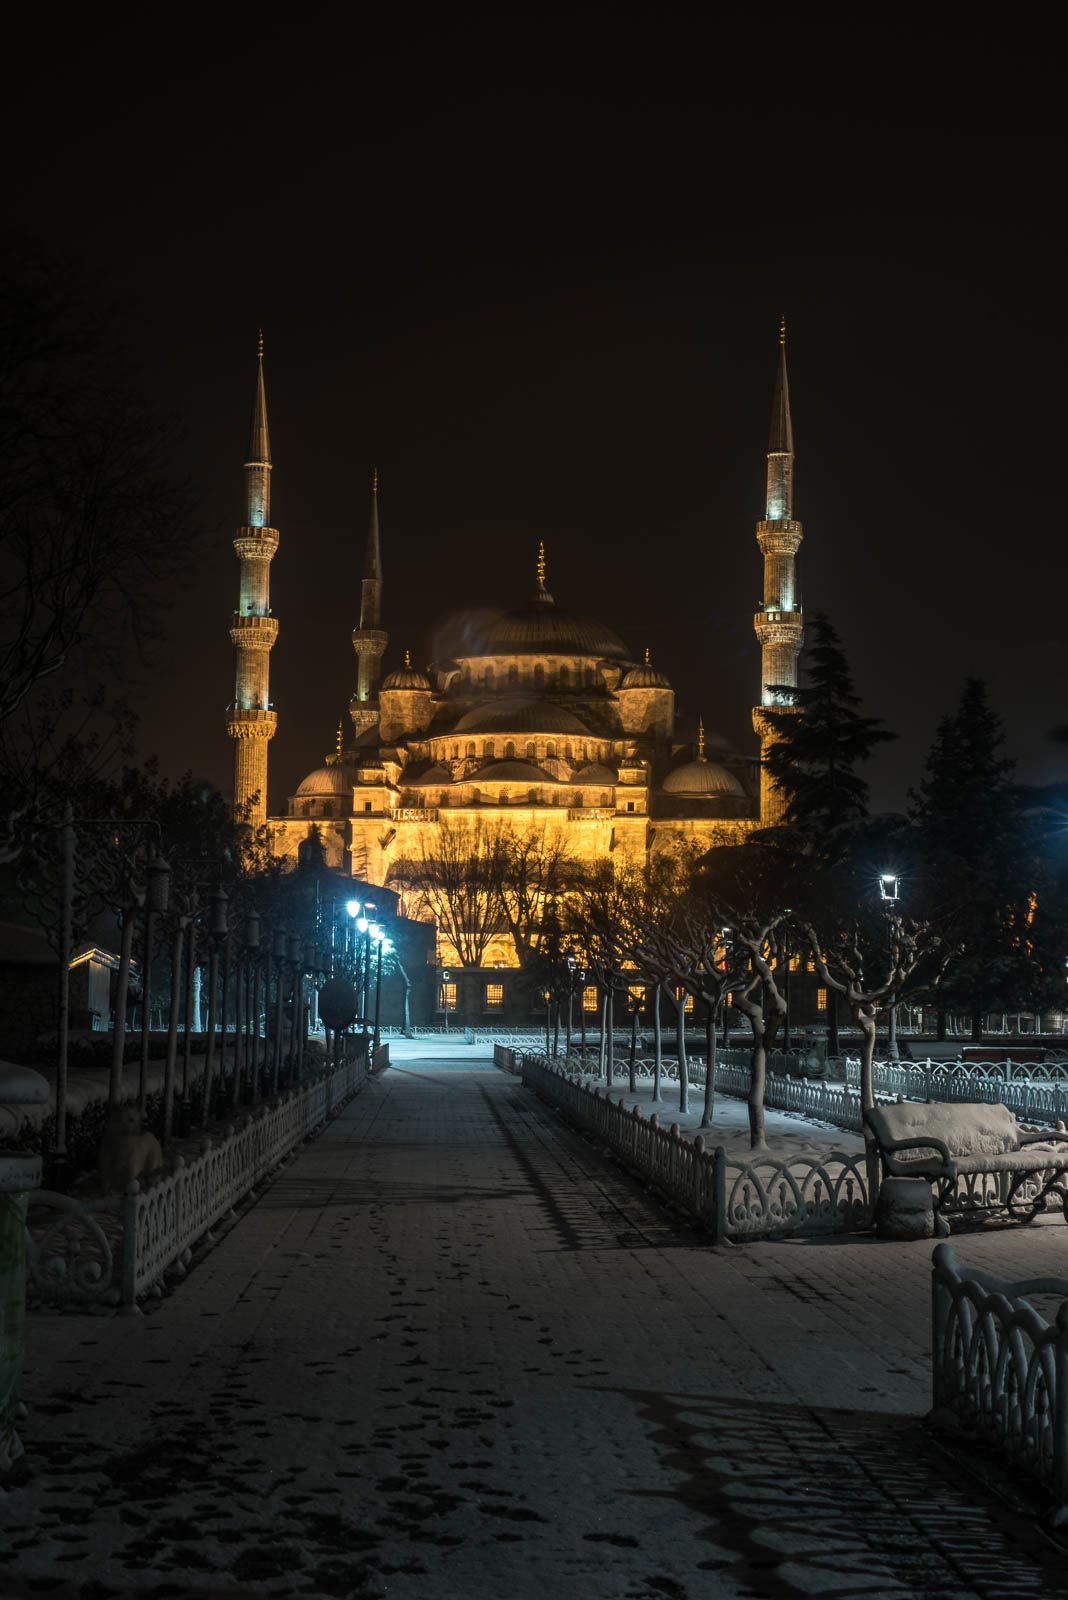 The blue mosque in istanbul at night.